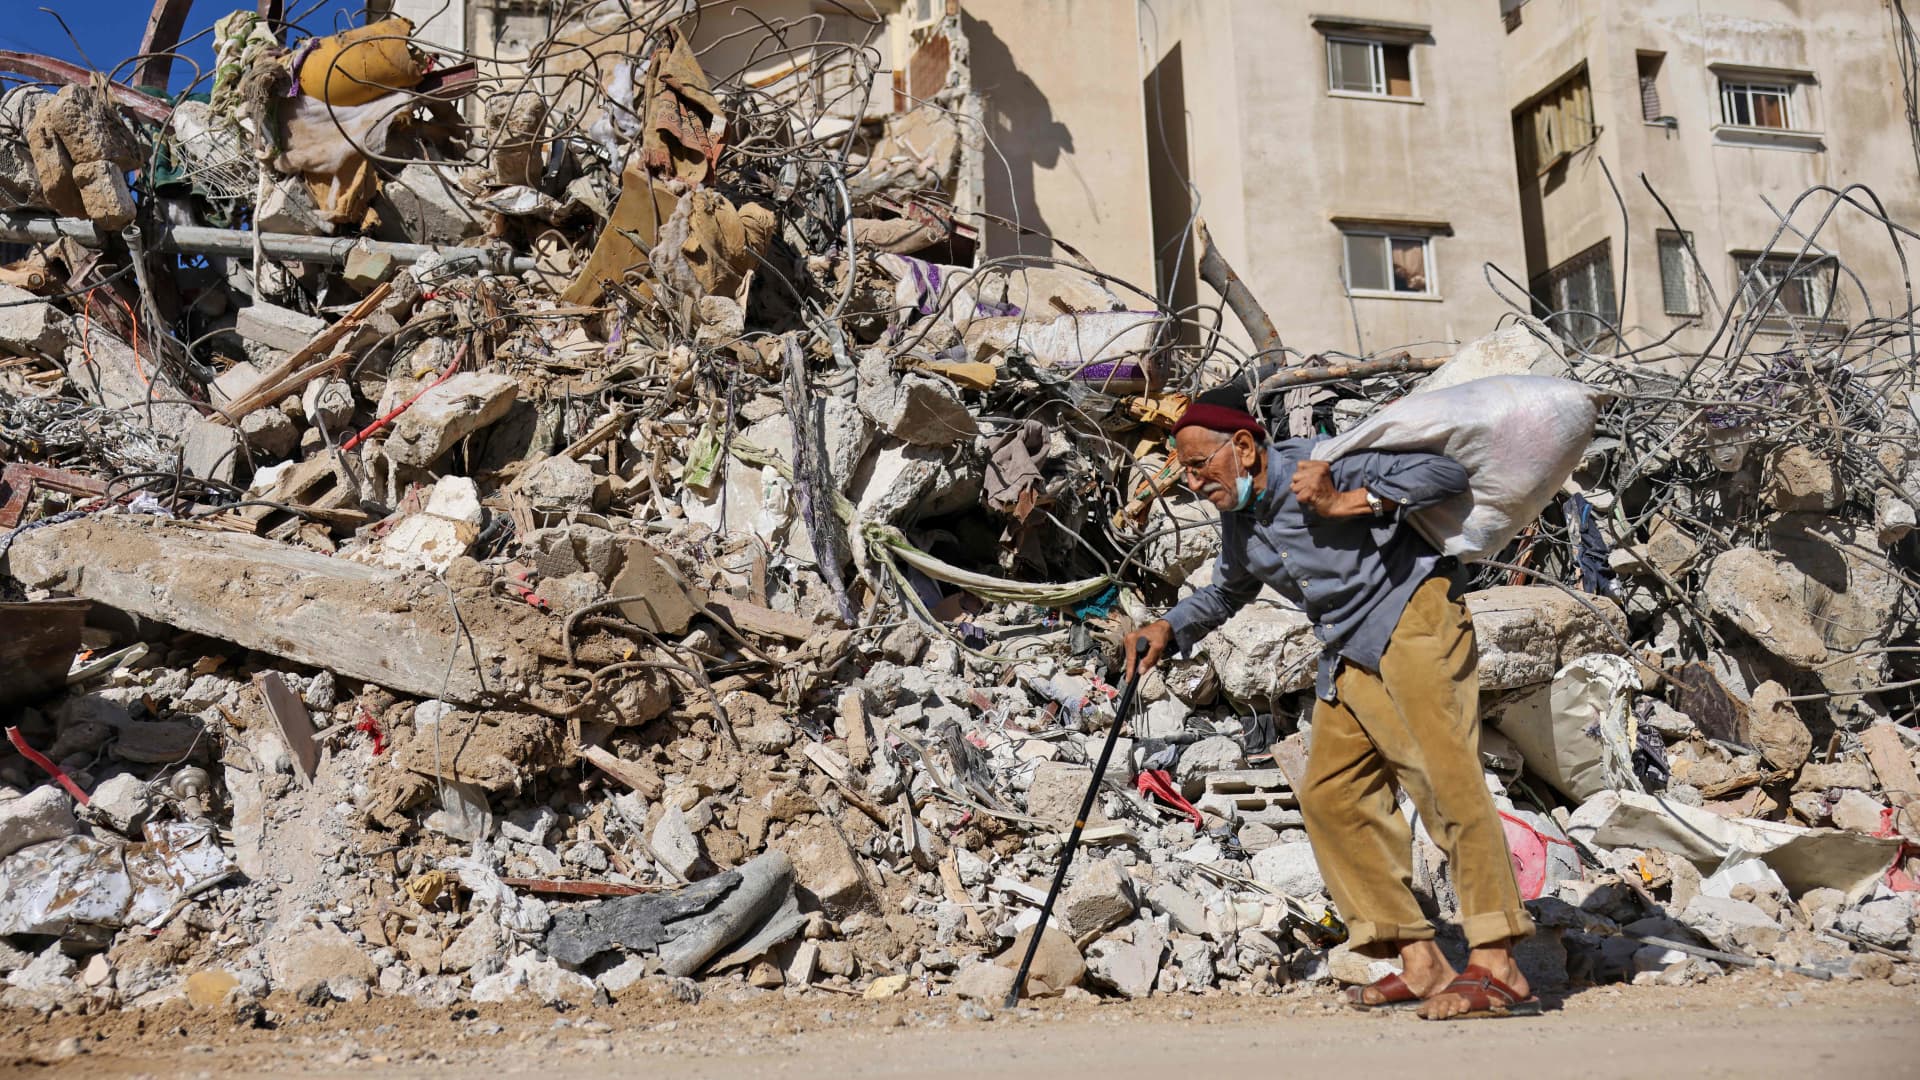 A Palestinian elderly man walks past a building destroyed by Israeli bombardment in Gaza City, on May 19, 2021.